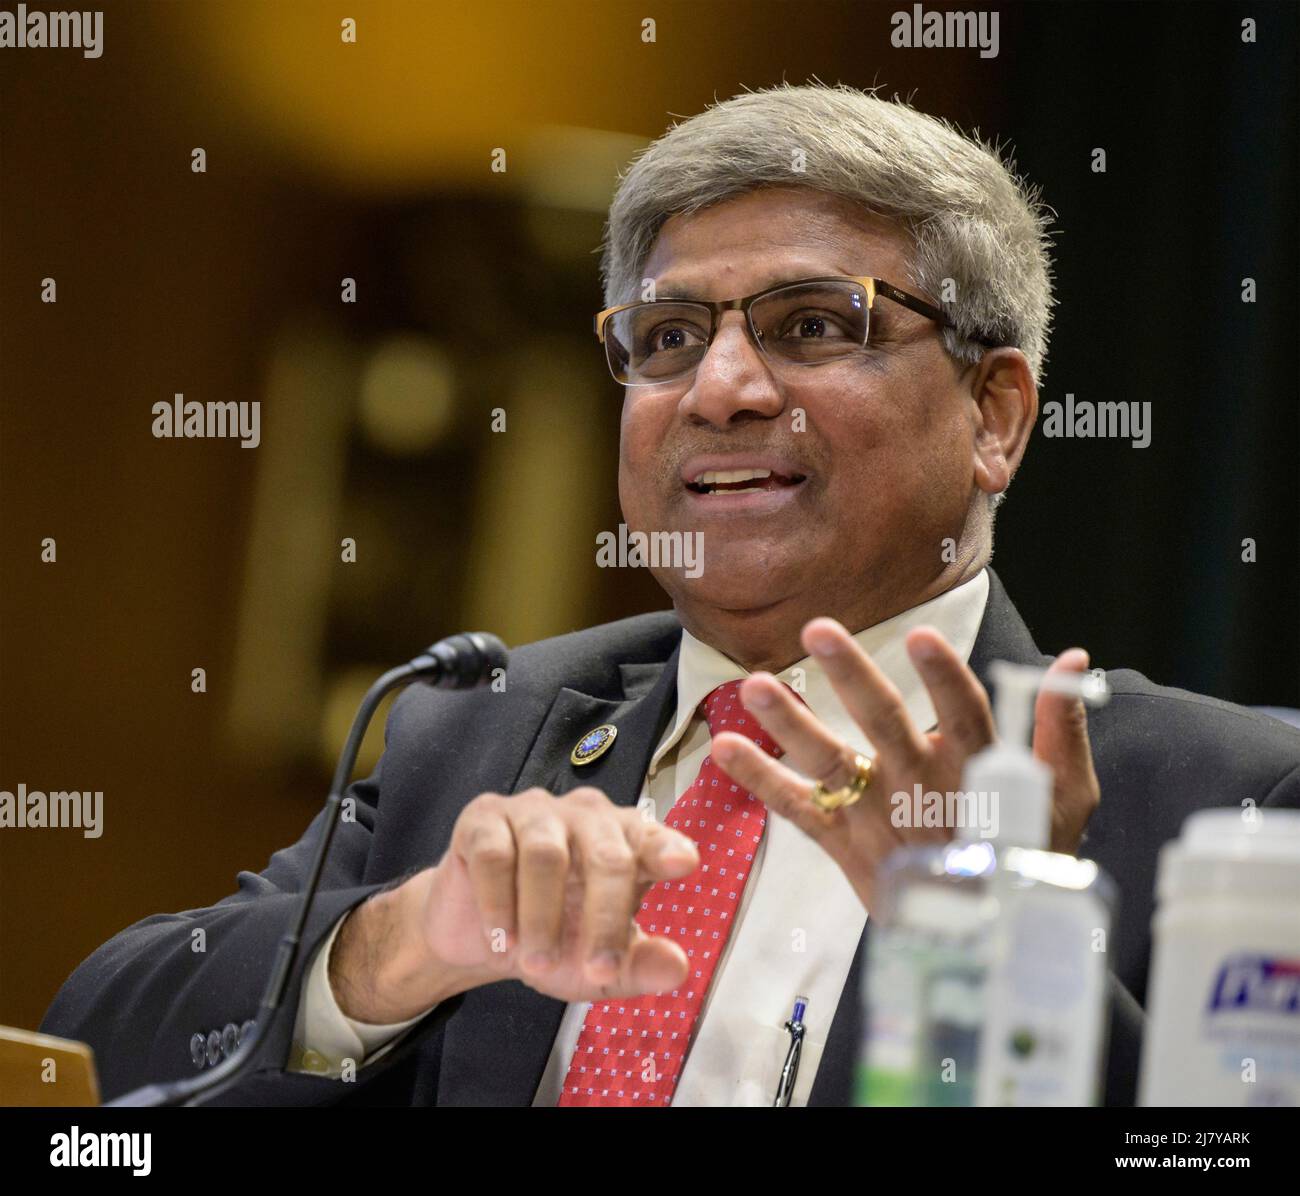 National Science Foundation Director Sethuraman Panchanathan, testifies before the Senate Appropriations Commerce, Justice, Science, and Related Agencies subcommittee during the FY 2023 budget hearing, at the Dirksen Senate Office Building, May 3, 2022, in Washington, D.C. Stock Photo